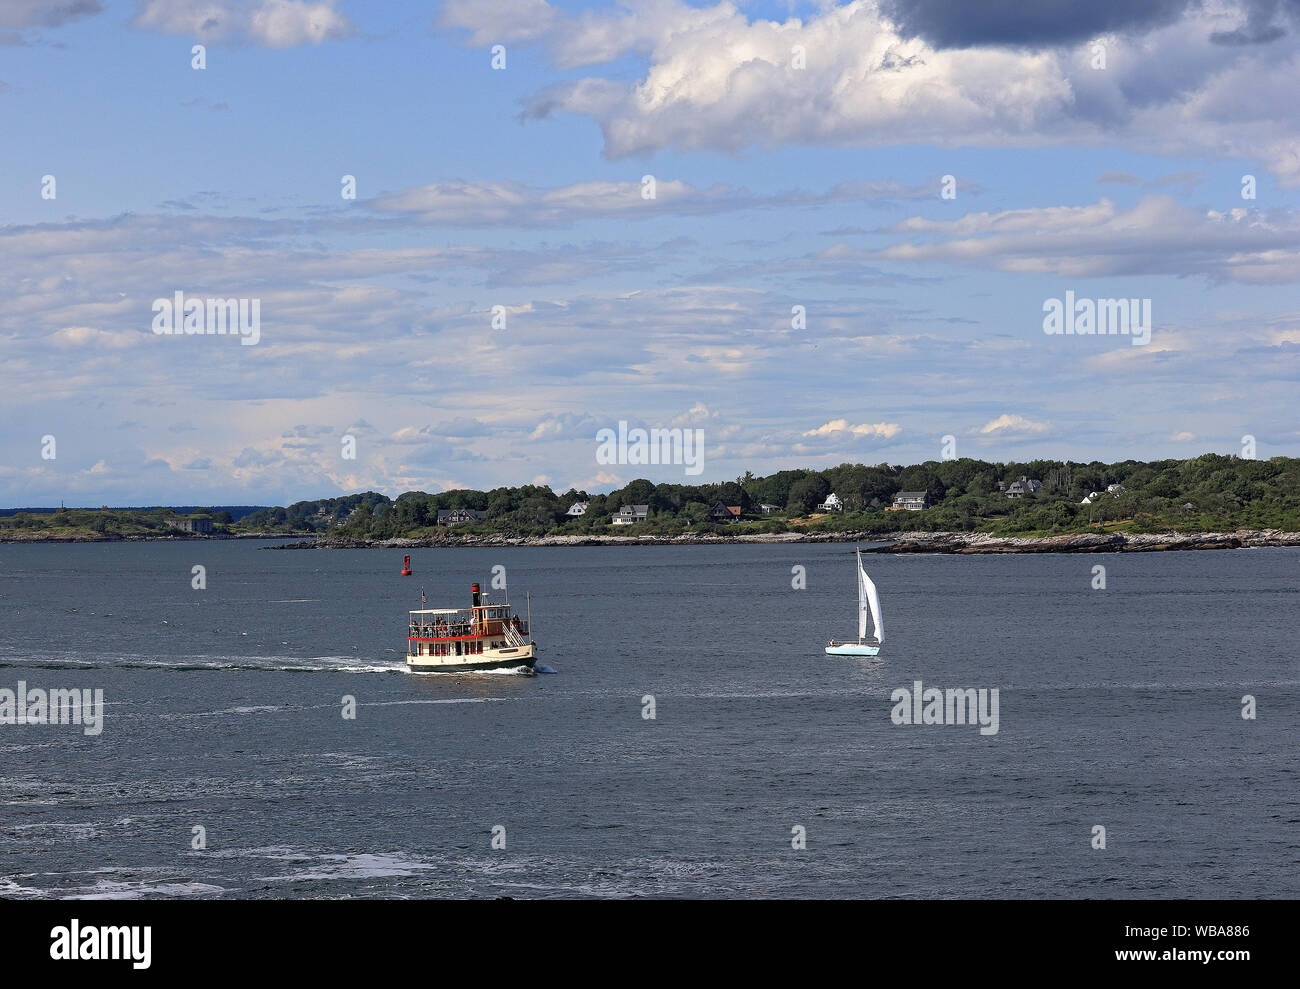 Portland, Maine - August 10, 2019: View of Danforth cove and boats from Fort Williams Park in Portland, Main Stock Photo